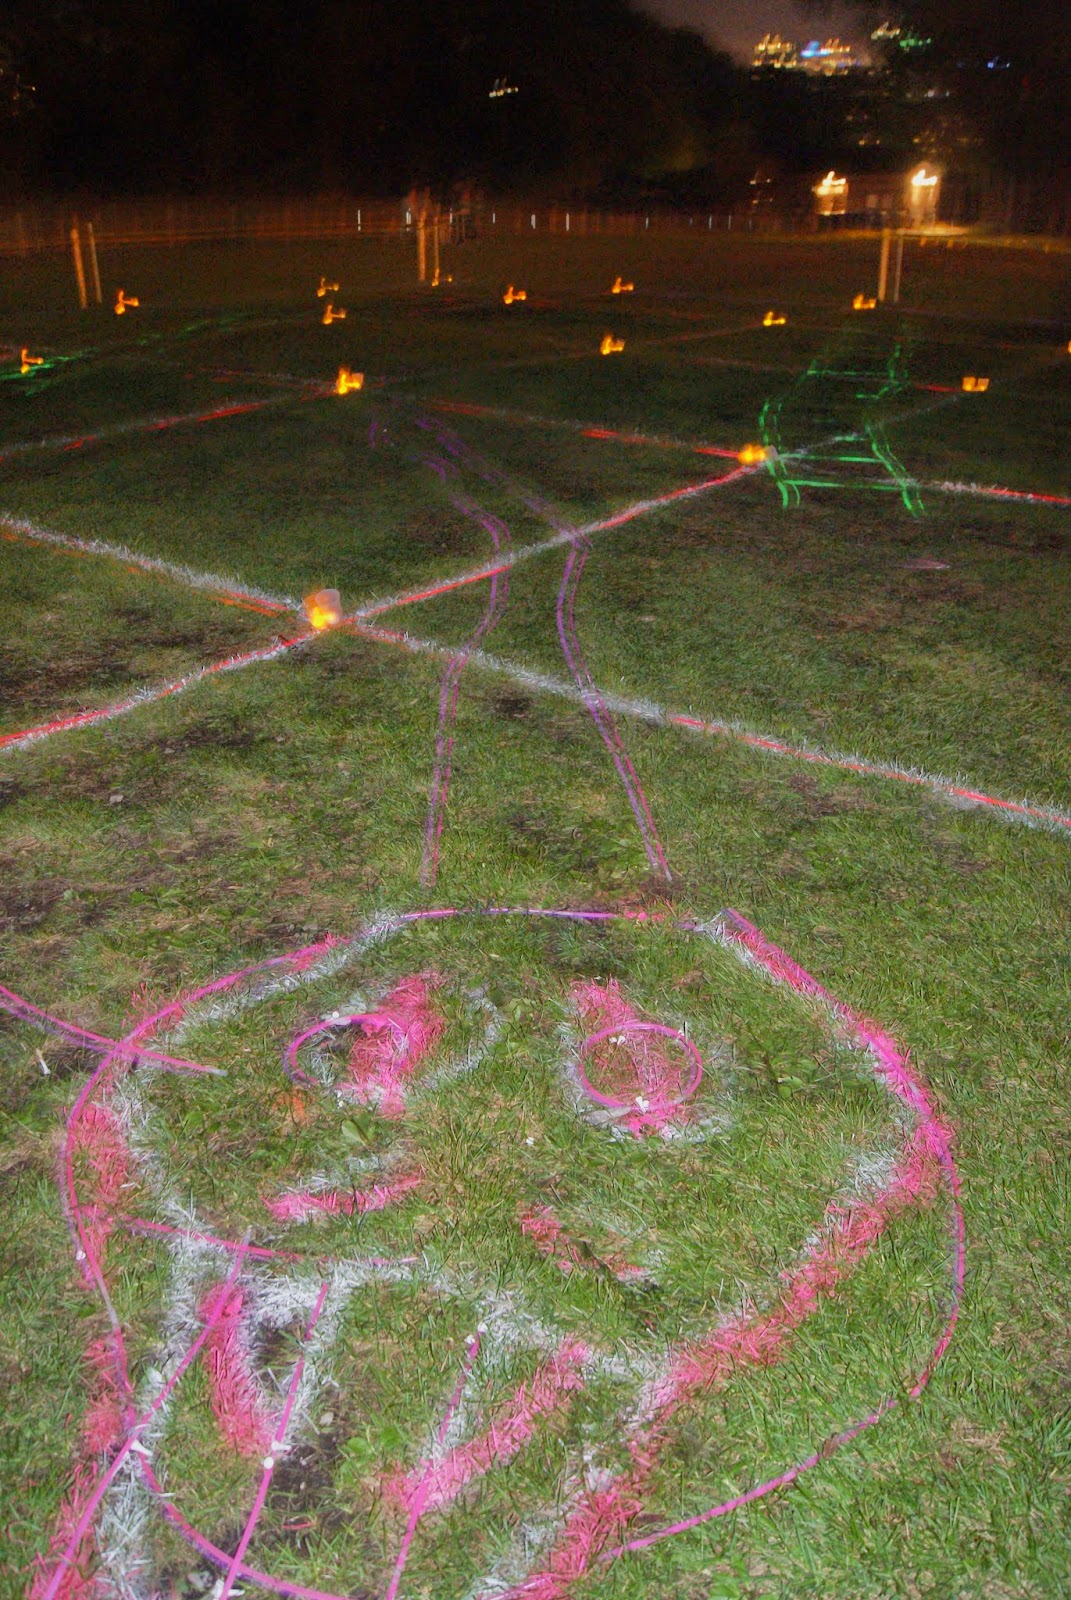 Toronto Nuit Blanche 2014: Gyan Chauper (Snakes and Ladders) by Daniel and Paul Dhir at Fort York, Art, Artmatters, Culture, Installation, Performances, Interactive, The Purple Scarf, Melanie.Ps, Ontario, Canada